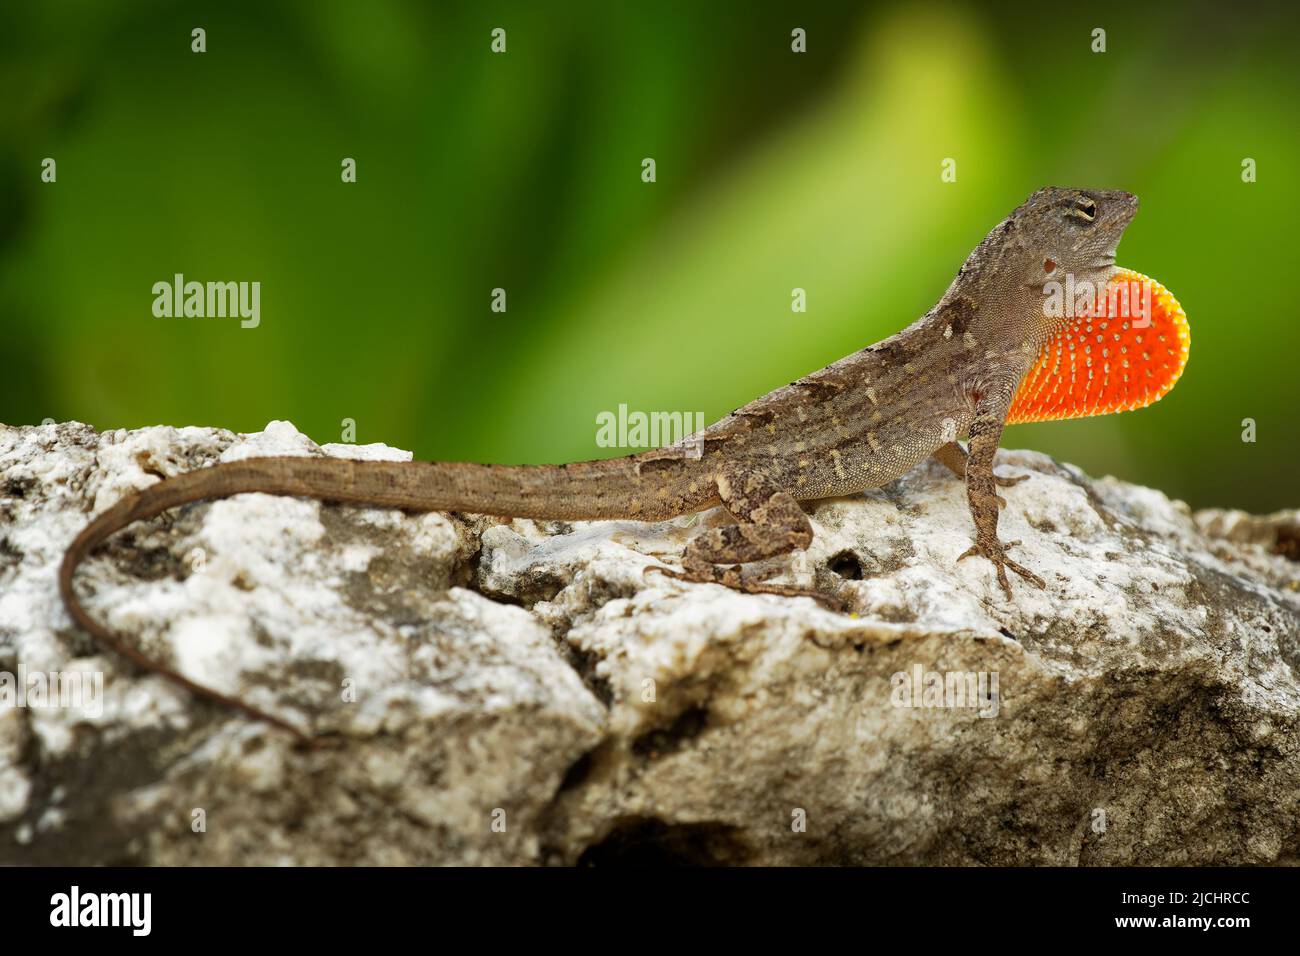 Brown Anole - Anolis sagrei also Cuban brown or De la Sagra anole, lizard in Dactyloidae, native to Cuba and Bahamas, widely introduced in Florida, Ha Stock Photo